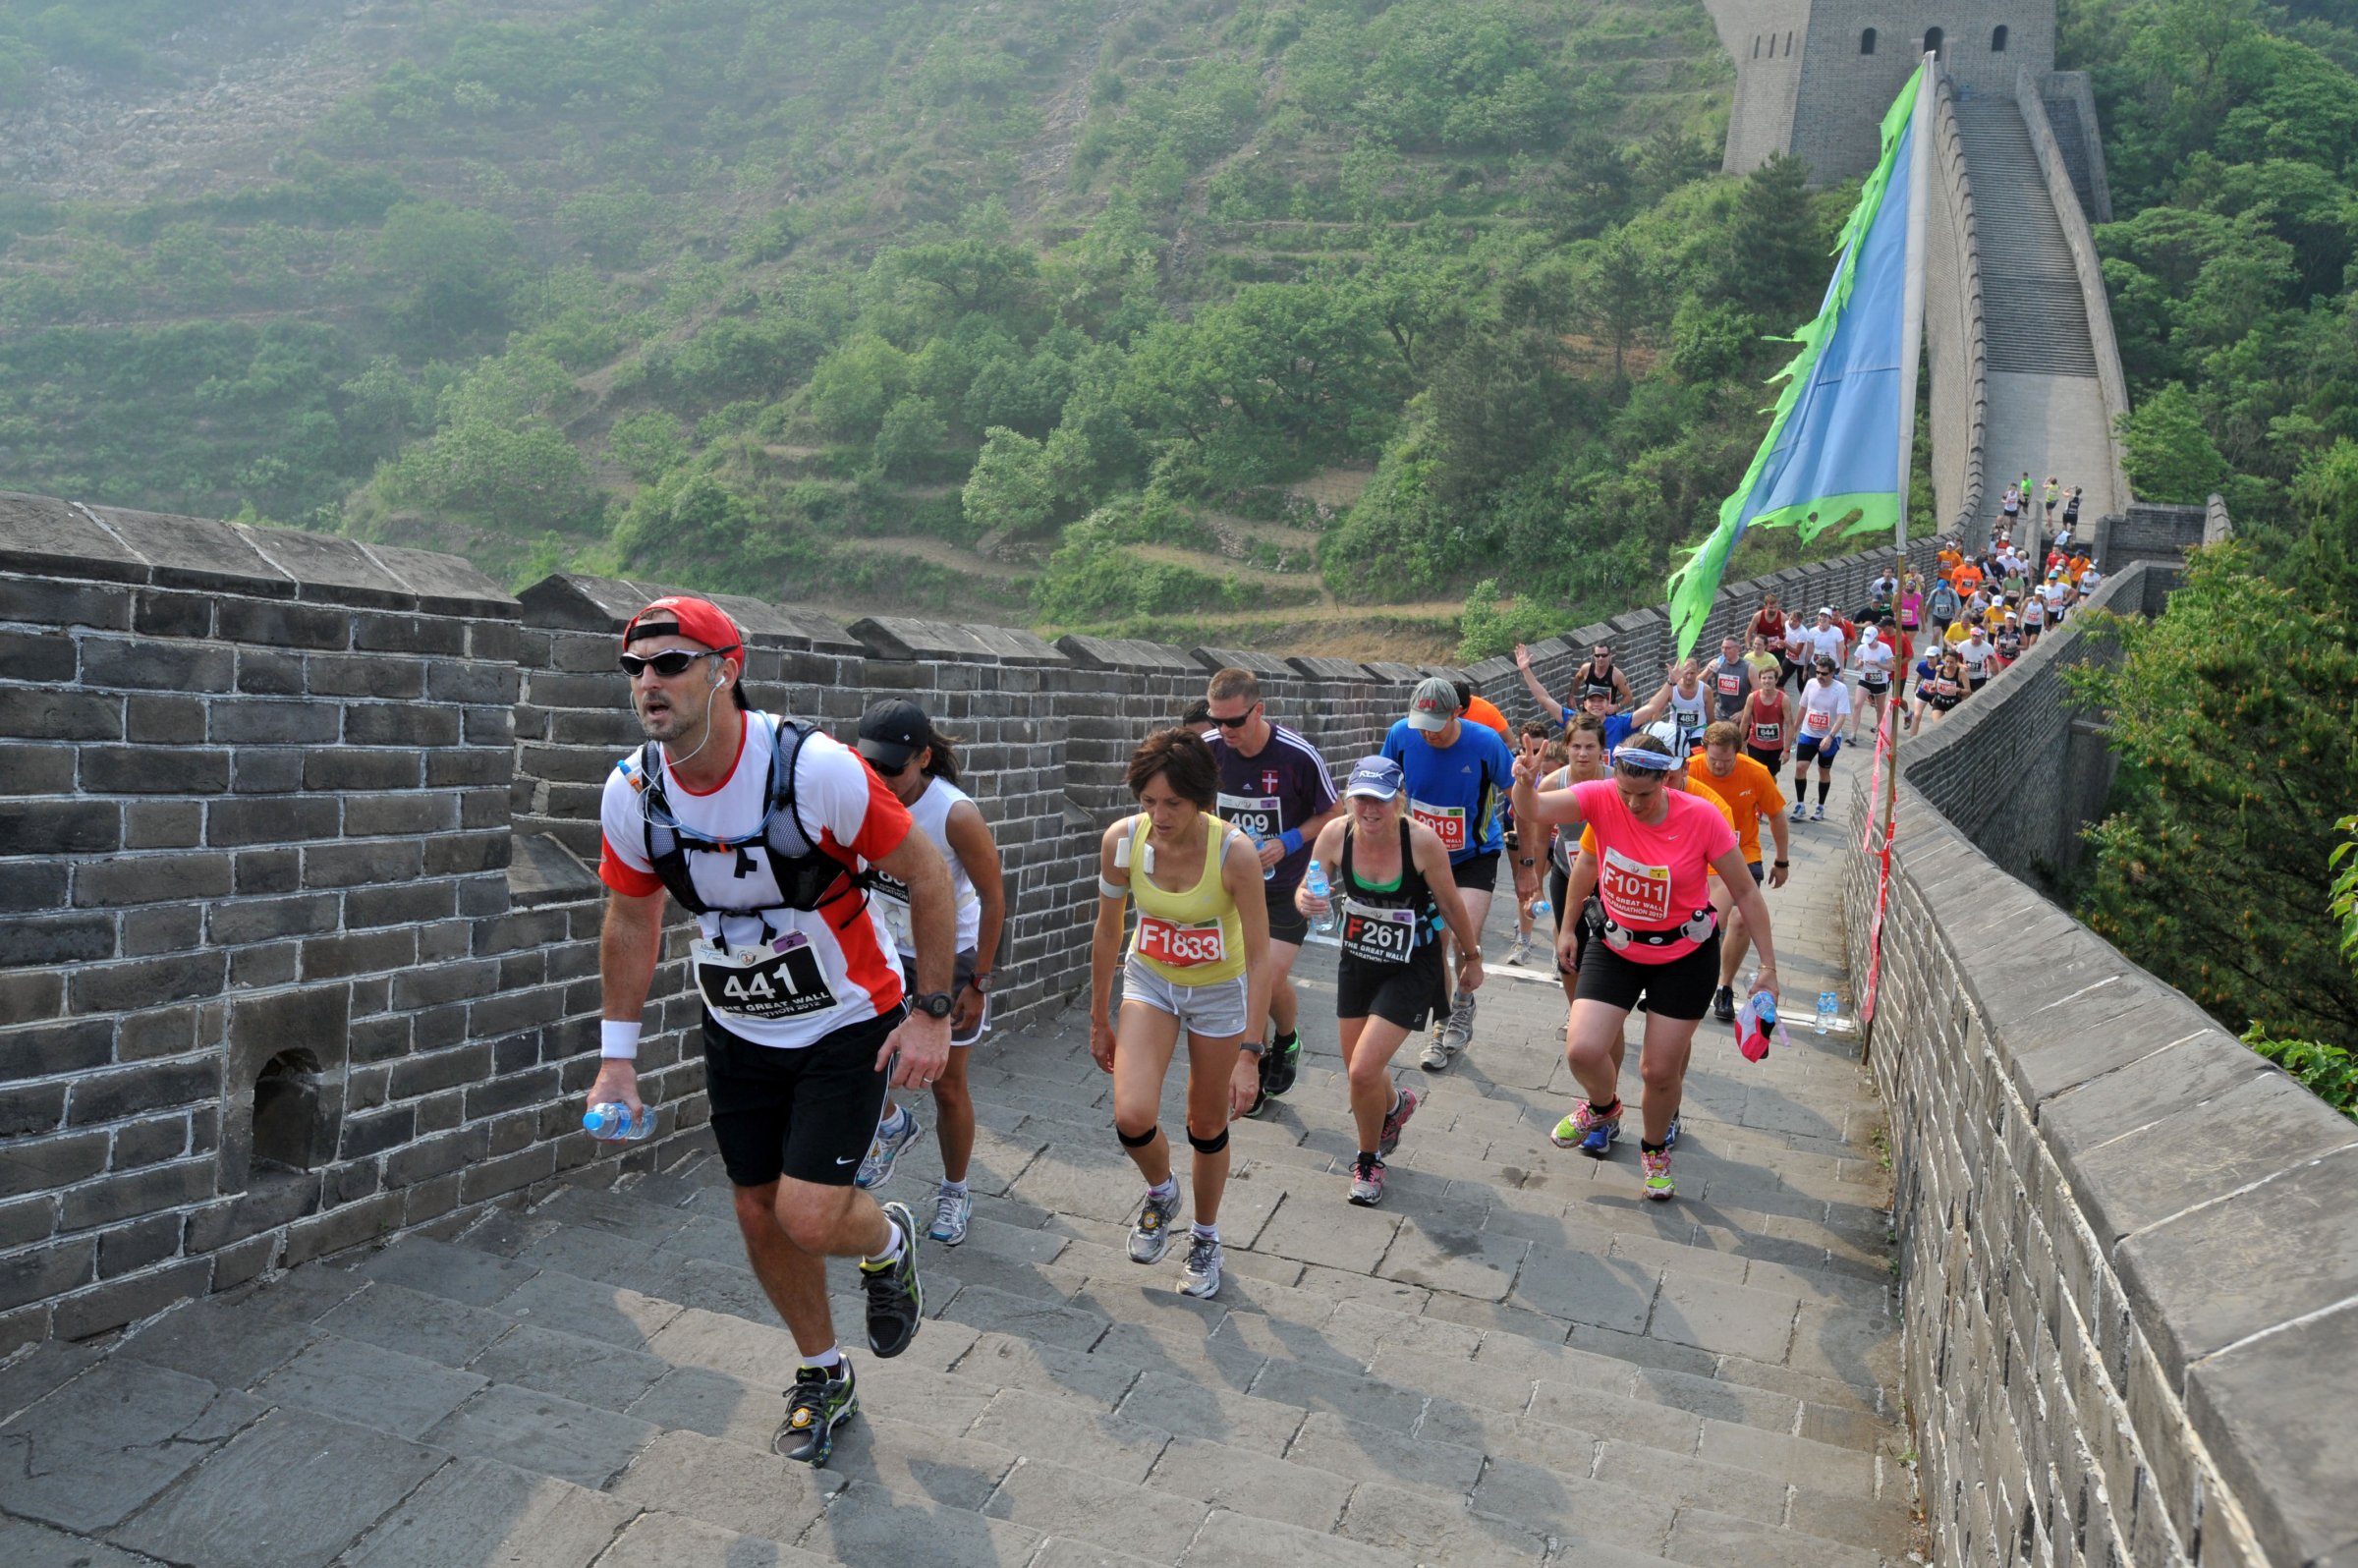 Runners compete in the Great Wall marathon at Huangyaguan (Yellow Cliff Pass) Great Wall in Tianjin, China on May 19, 2012.